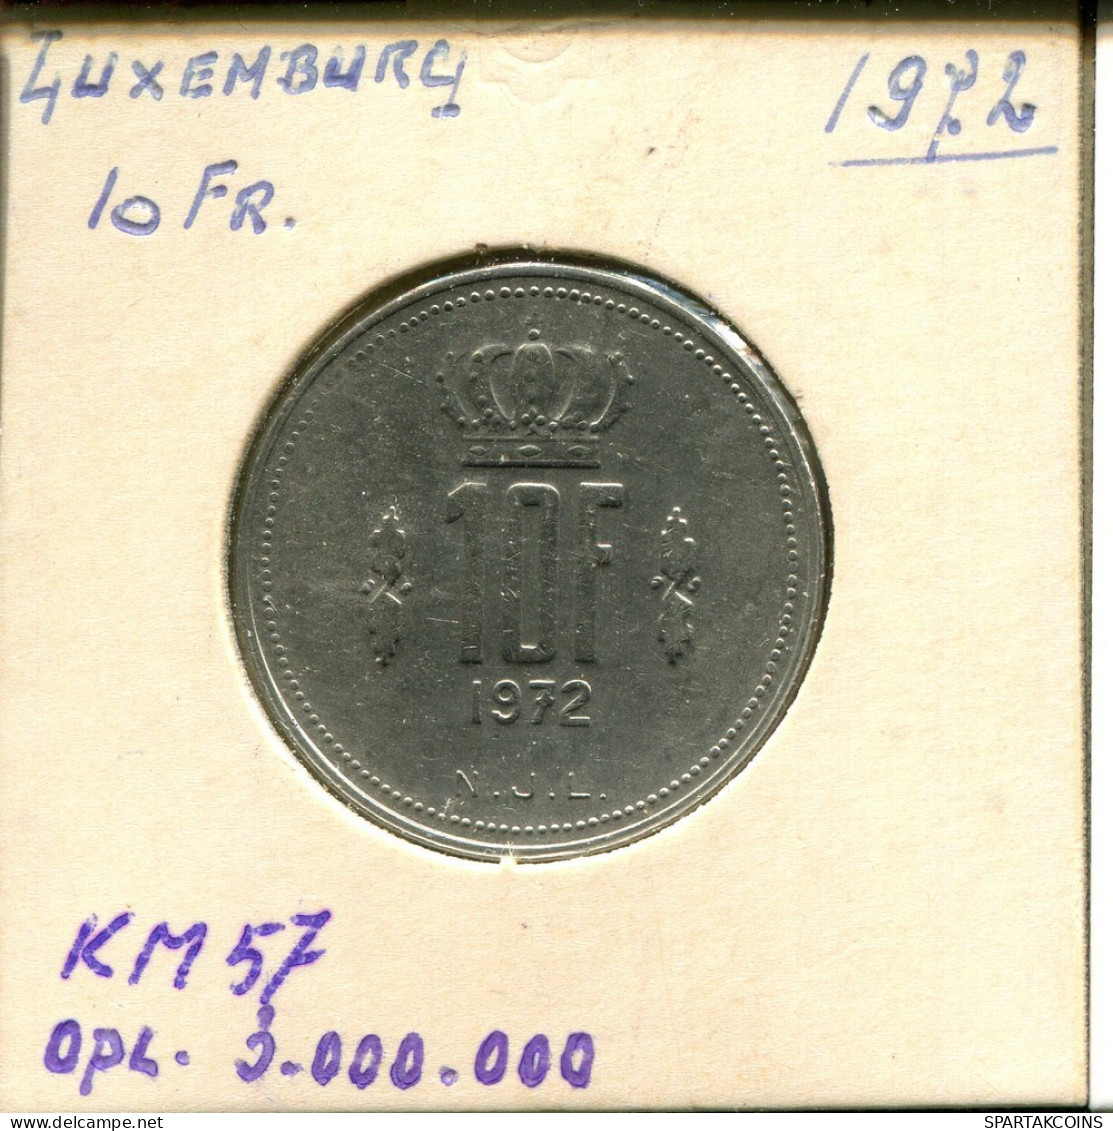 10 FRANCS 1972 LUXEMBURG LUXEMBOURG Münze #AT239.D.A - Lussemburgo